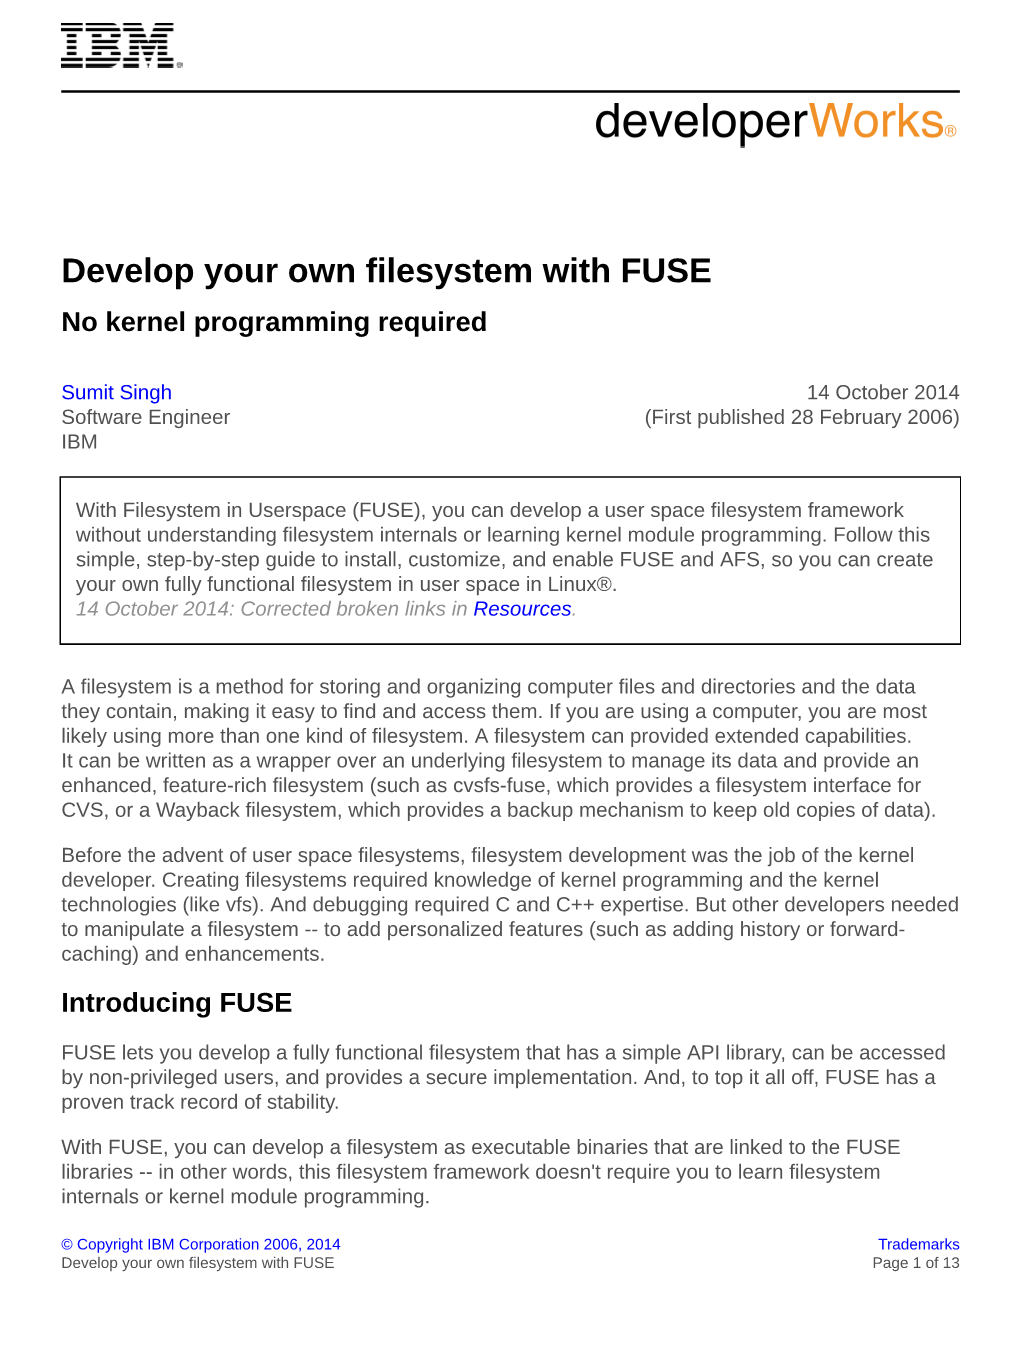 Develop Your Own Filesystem with FUSE No Kernel Programming Required